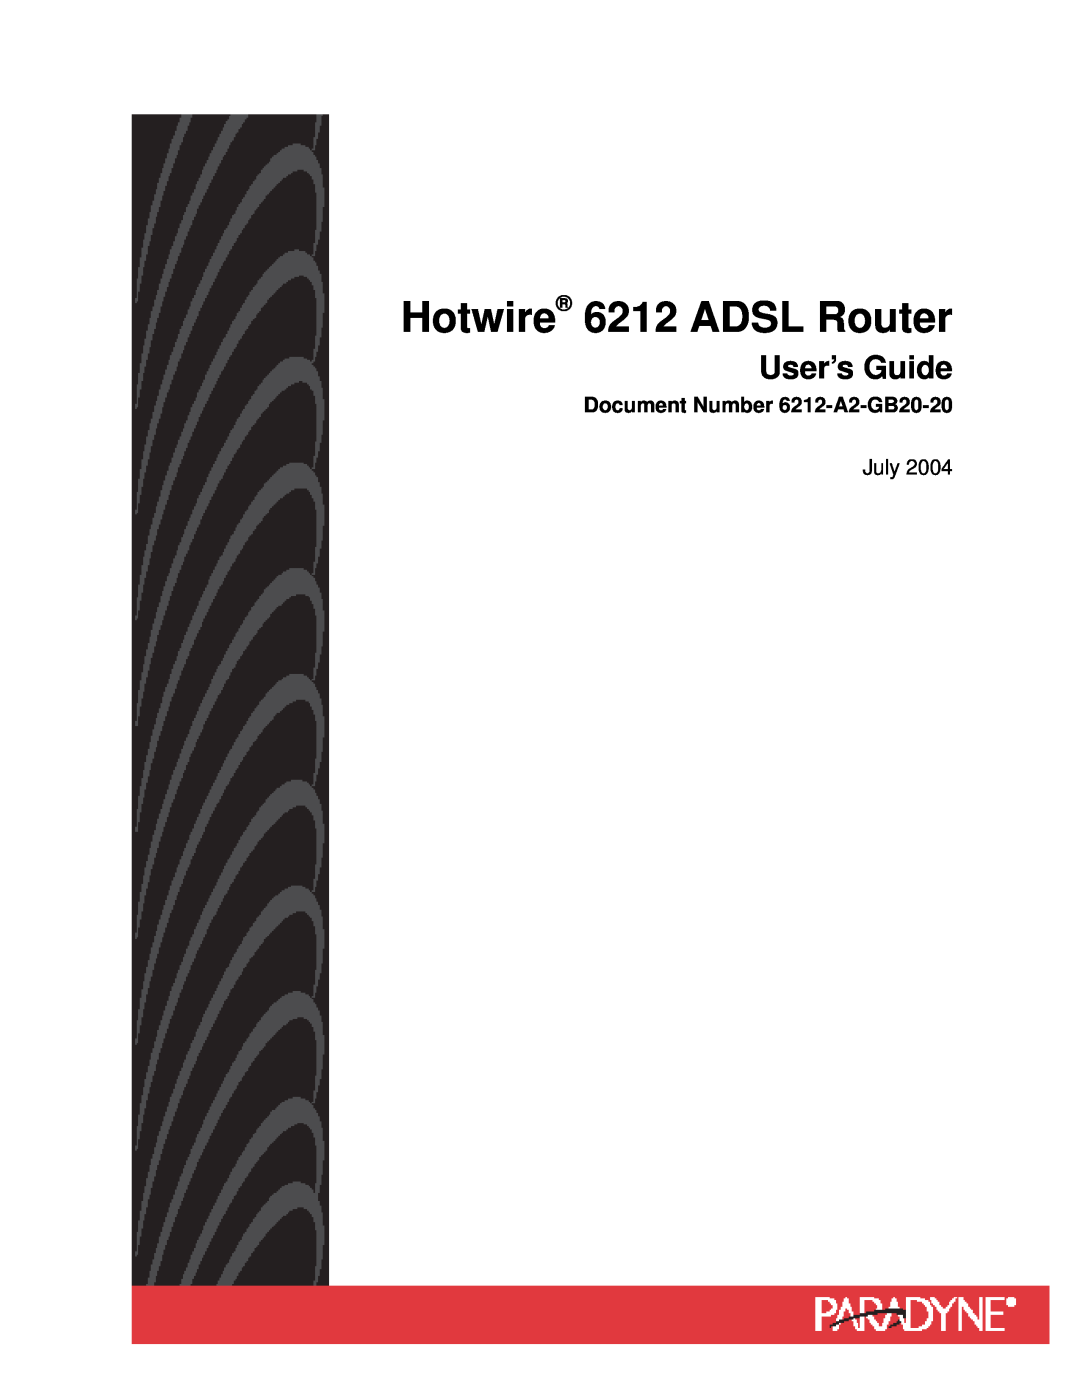 Paradyne manual Document Number 6212-A2-GB20-20, Hotwire 6212 ADSL Router, User’s Guide, July 